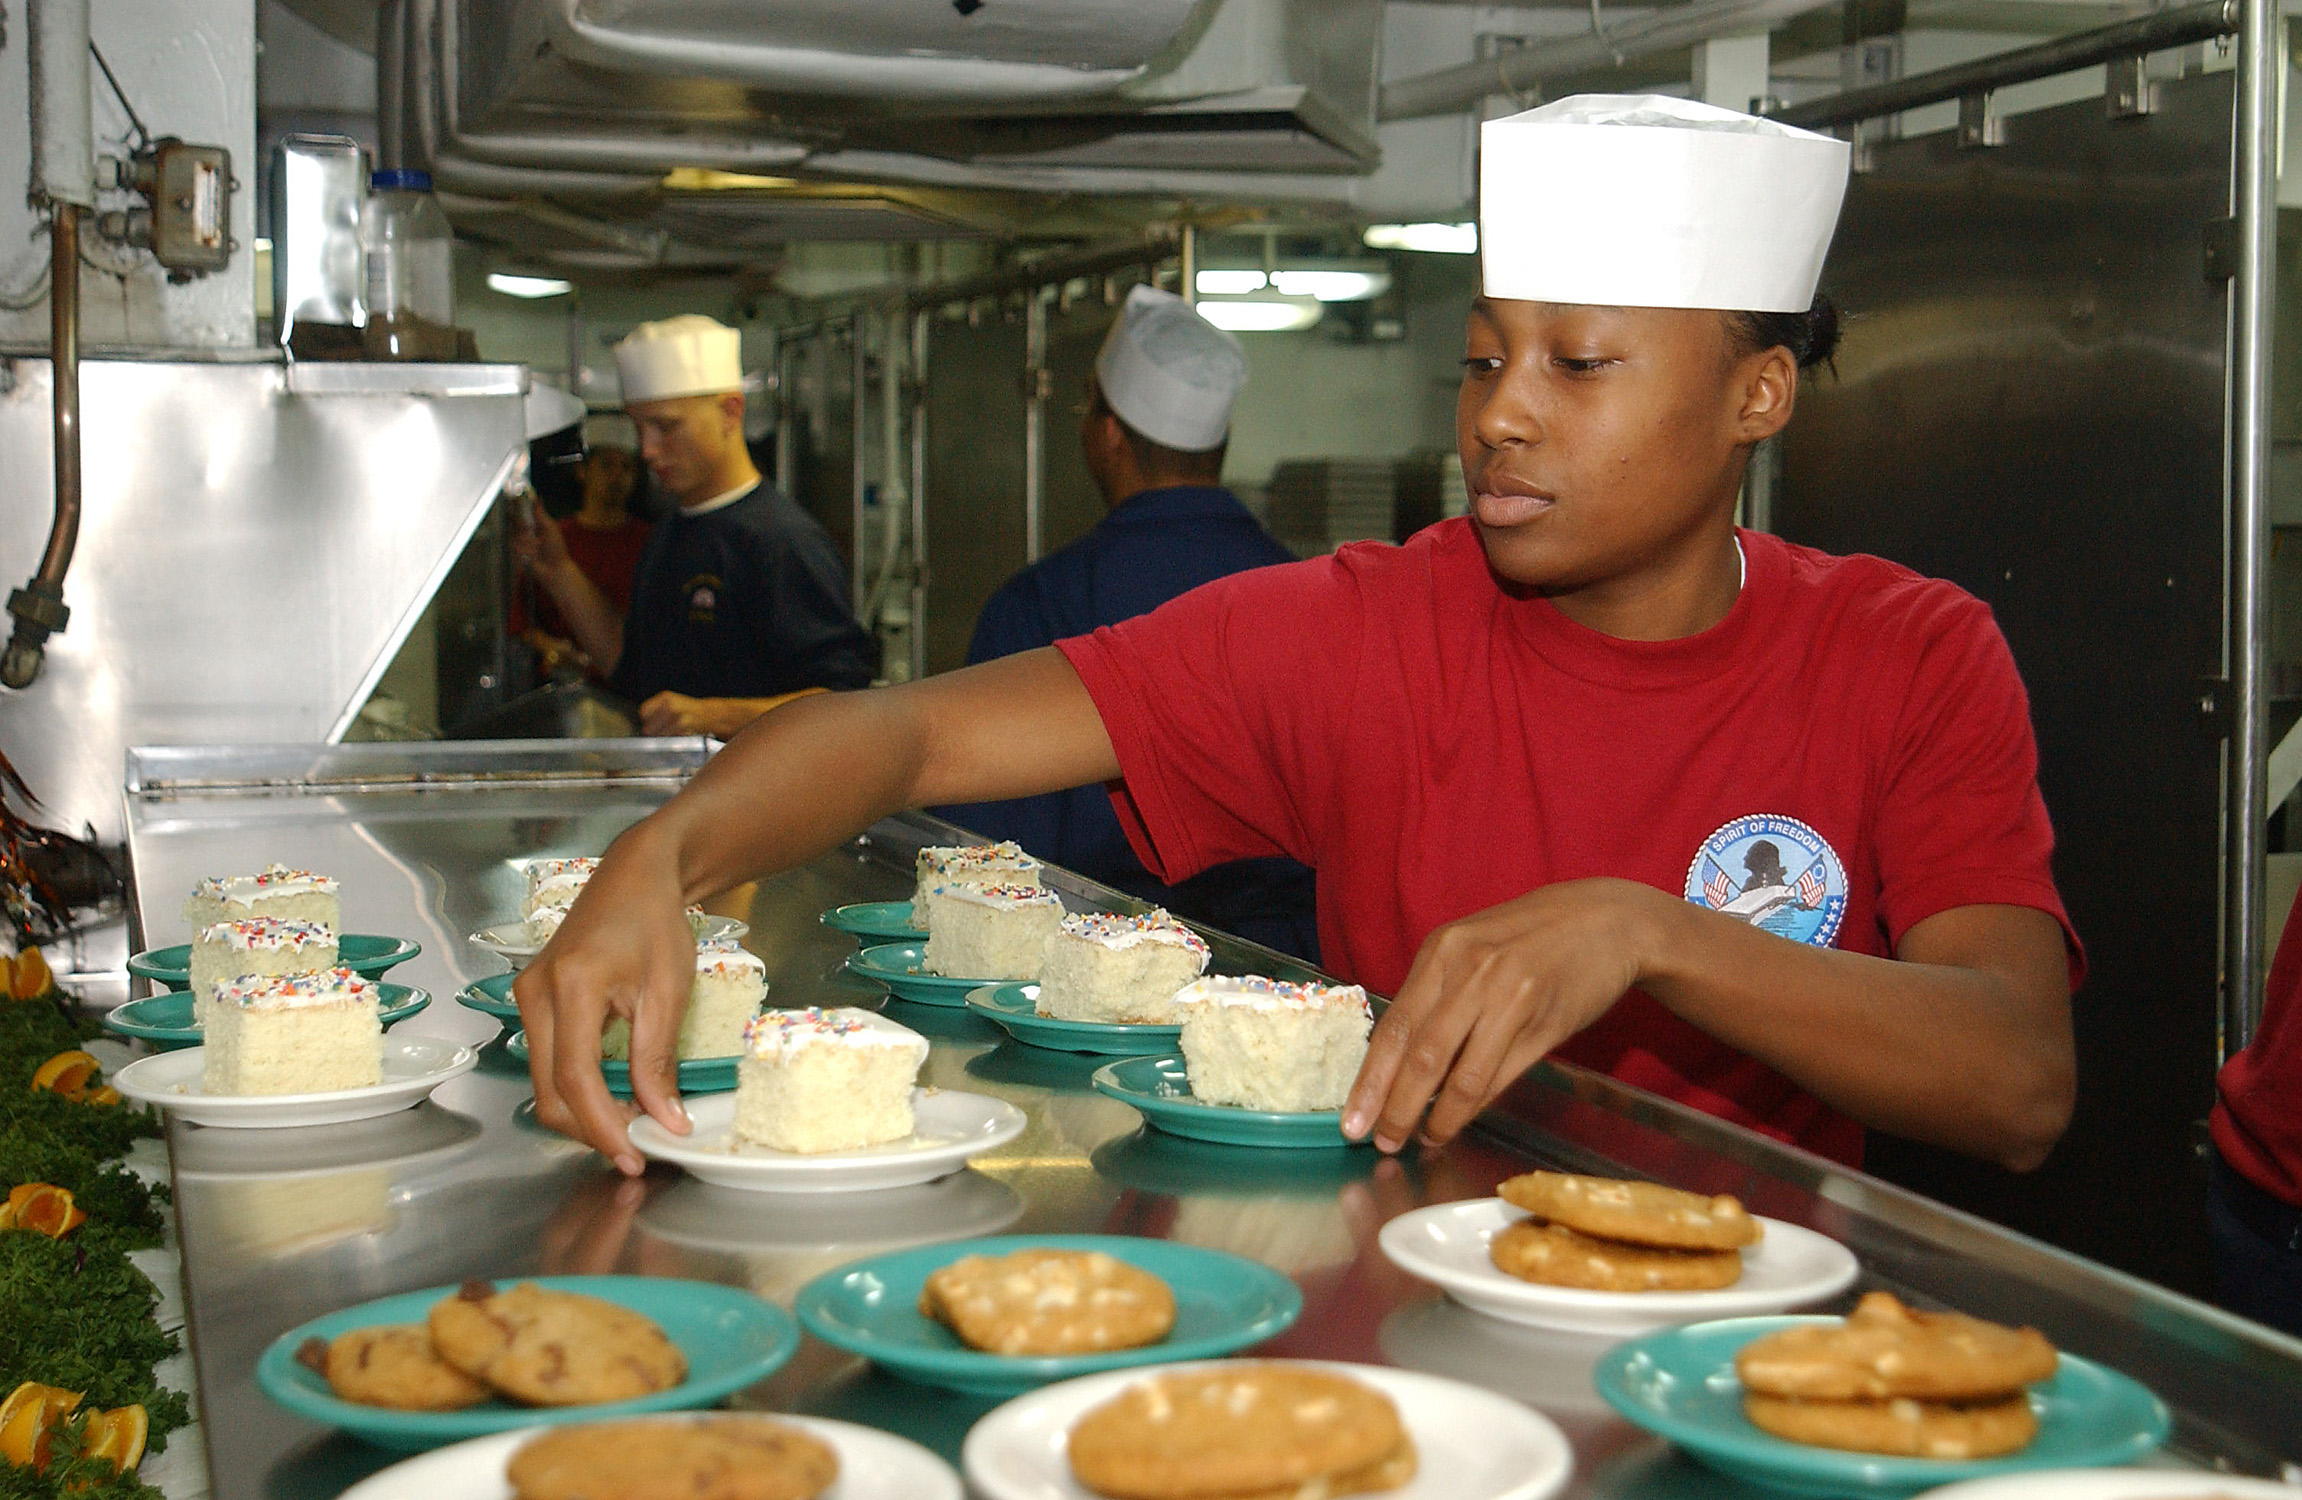 US Navy 031020-N-1127G-001 Seaman Elivian Clark, from Atlanta, places desserts out on the chow line aboard USS George Washington (CVN 73)